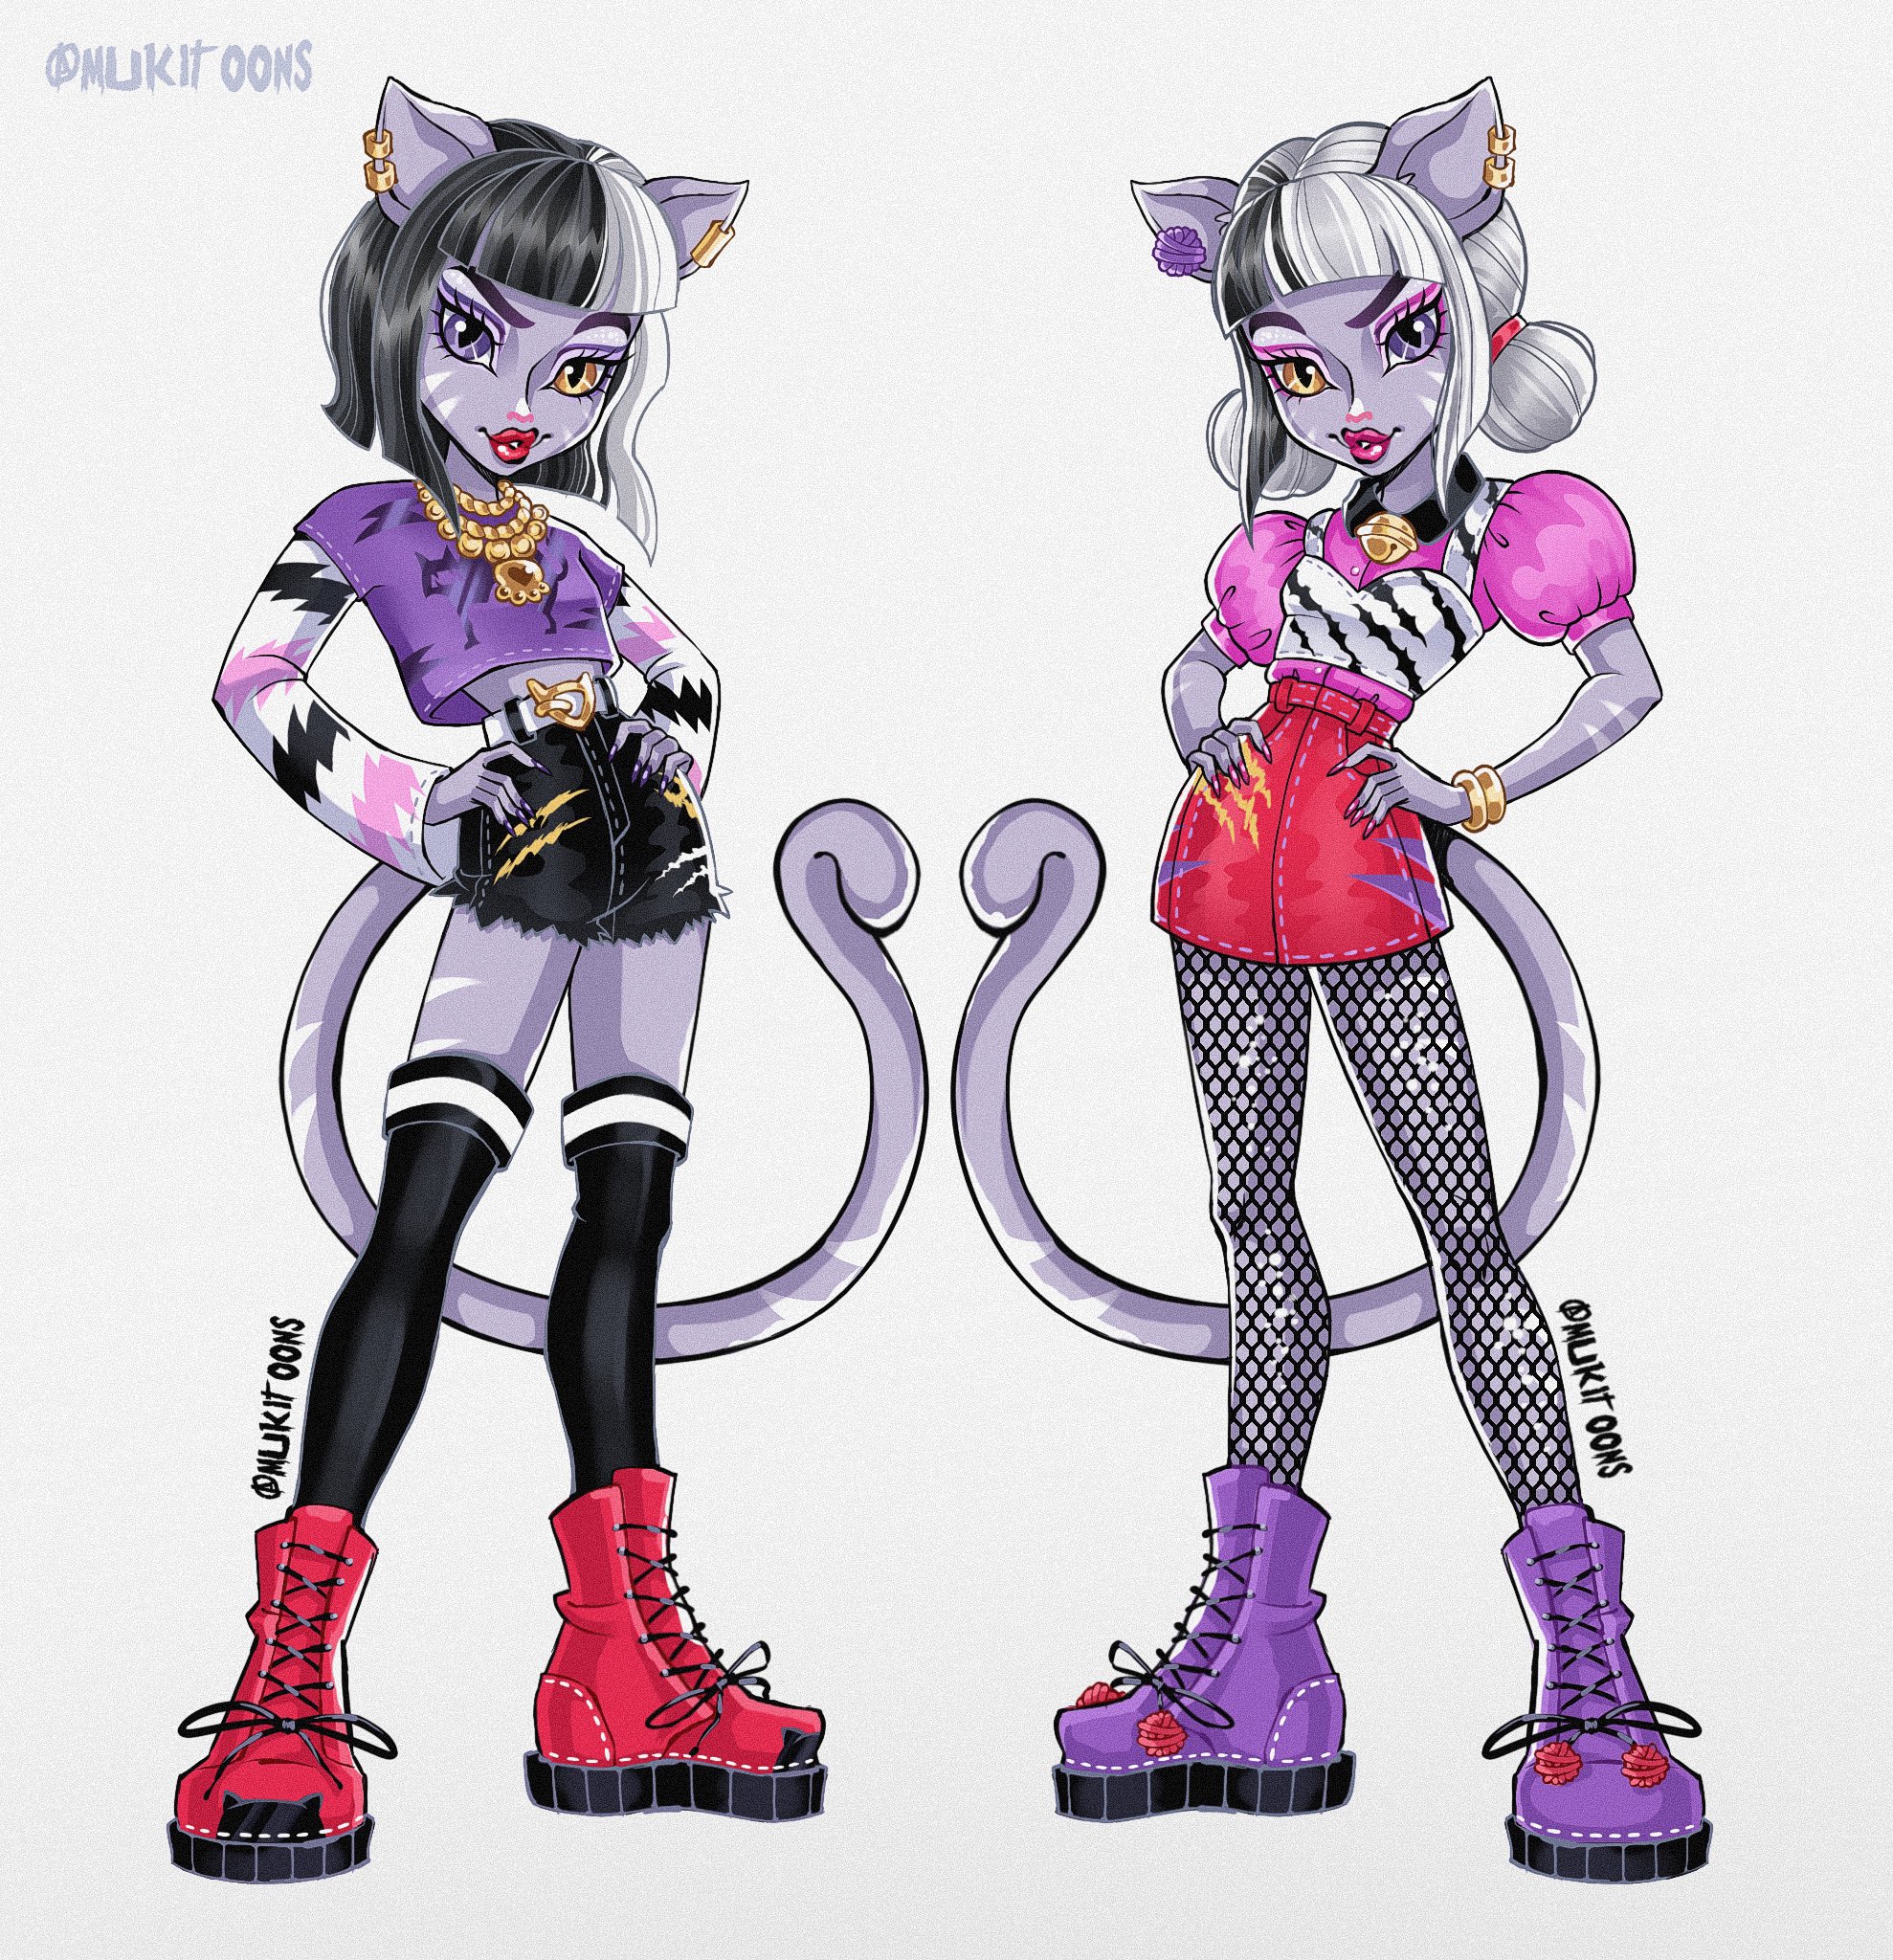 Monster High art inspired by new Monster High G3 dolls and their